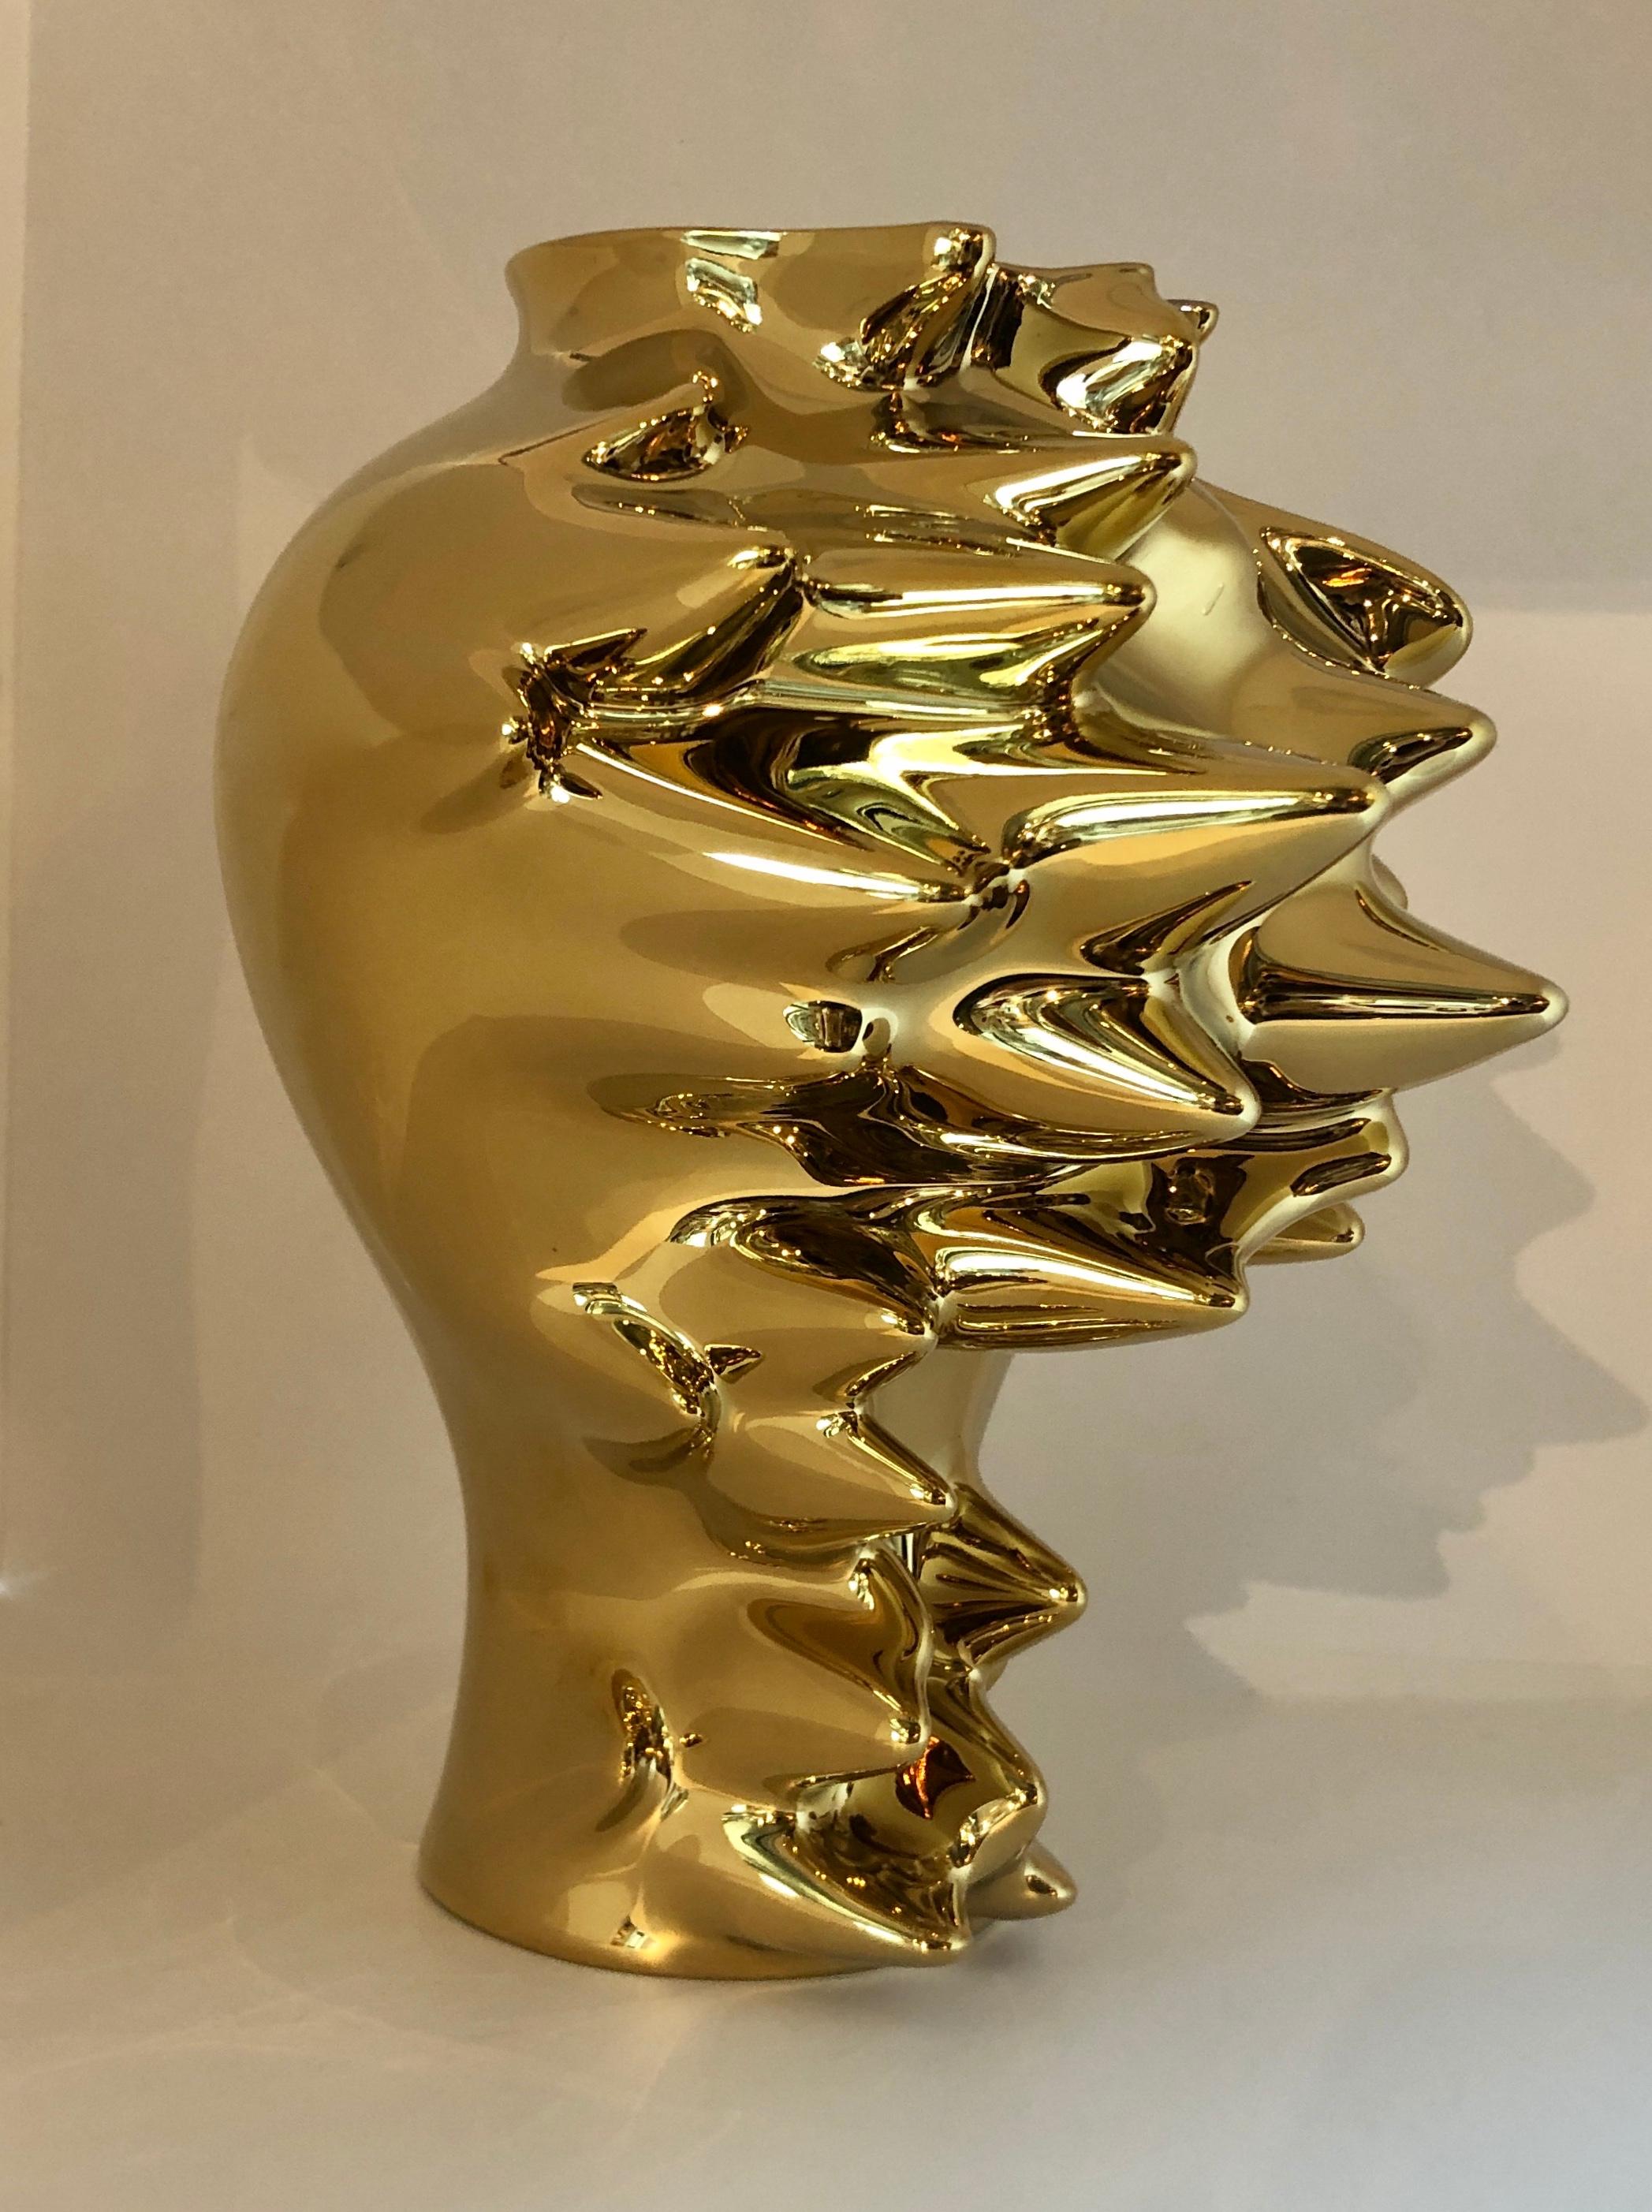 Offered is a gold titanium alloy over porcelain with white porcelain interior entitled 